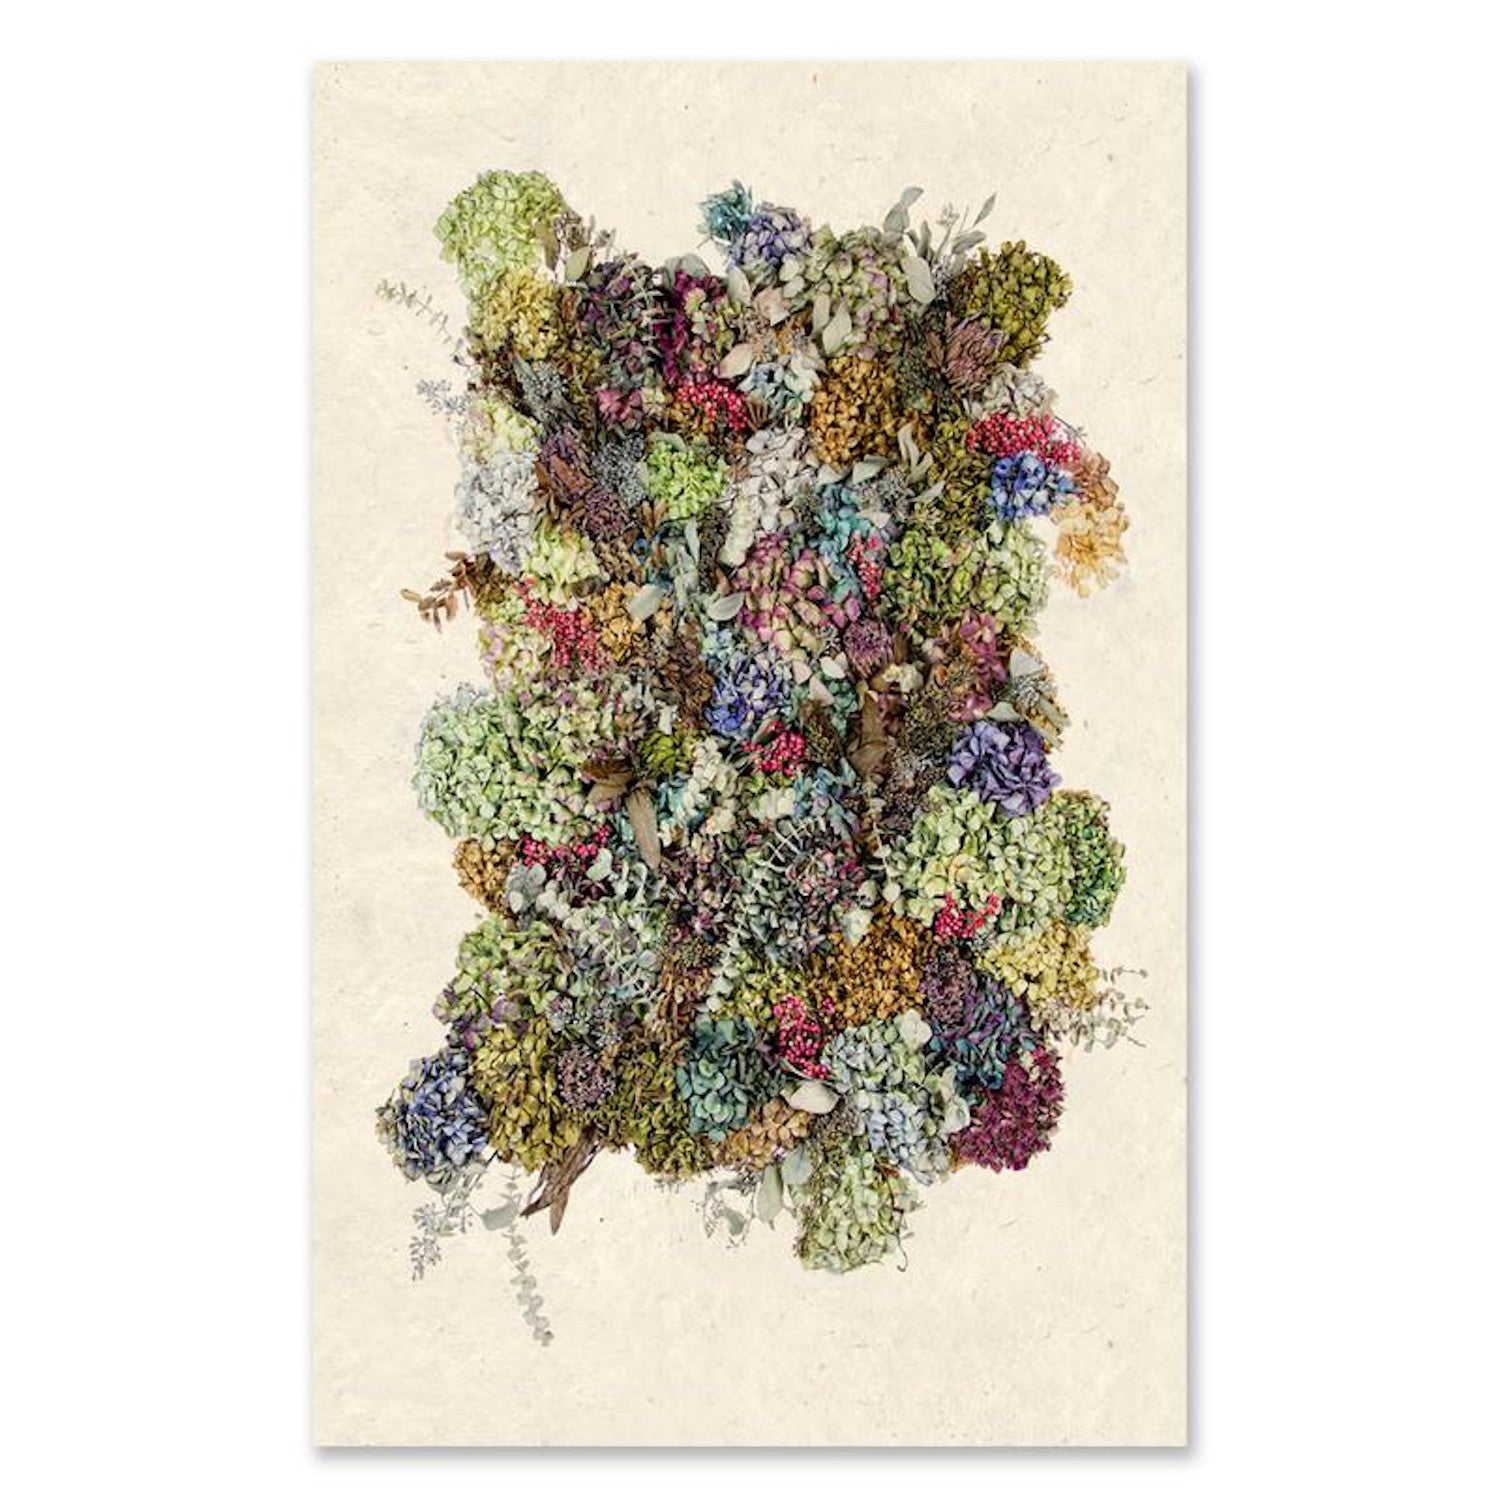 This Collective Hydrangea Grand Format print by Barloga Studios features a variety of succulents on a beige background, printed on high-quality cotton rag paper. Perfect for adding a touch of nature to your space. Available for shipping worldwide.